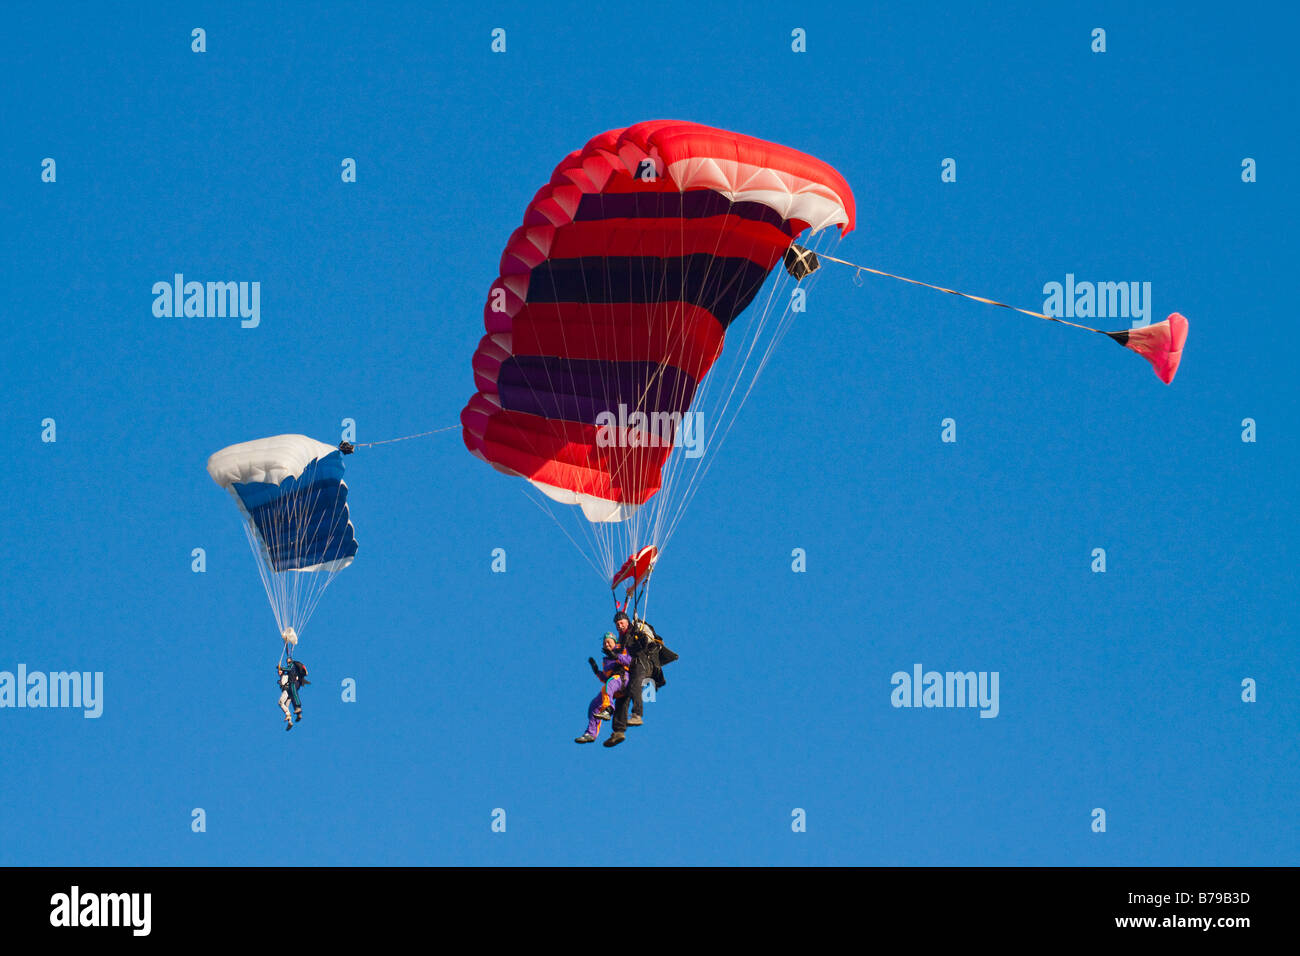 TANDEM SKYDIVE. TWO TANDEM  PARACHUTES FLYING AGAINST A BLUE SKY CARRYING TWO PEOPLE EACH, ONE RED STRIPED AND ONE BLUE CANOPY Stock Photo